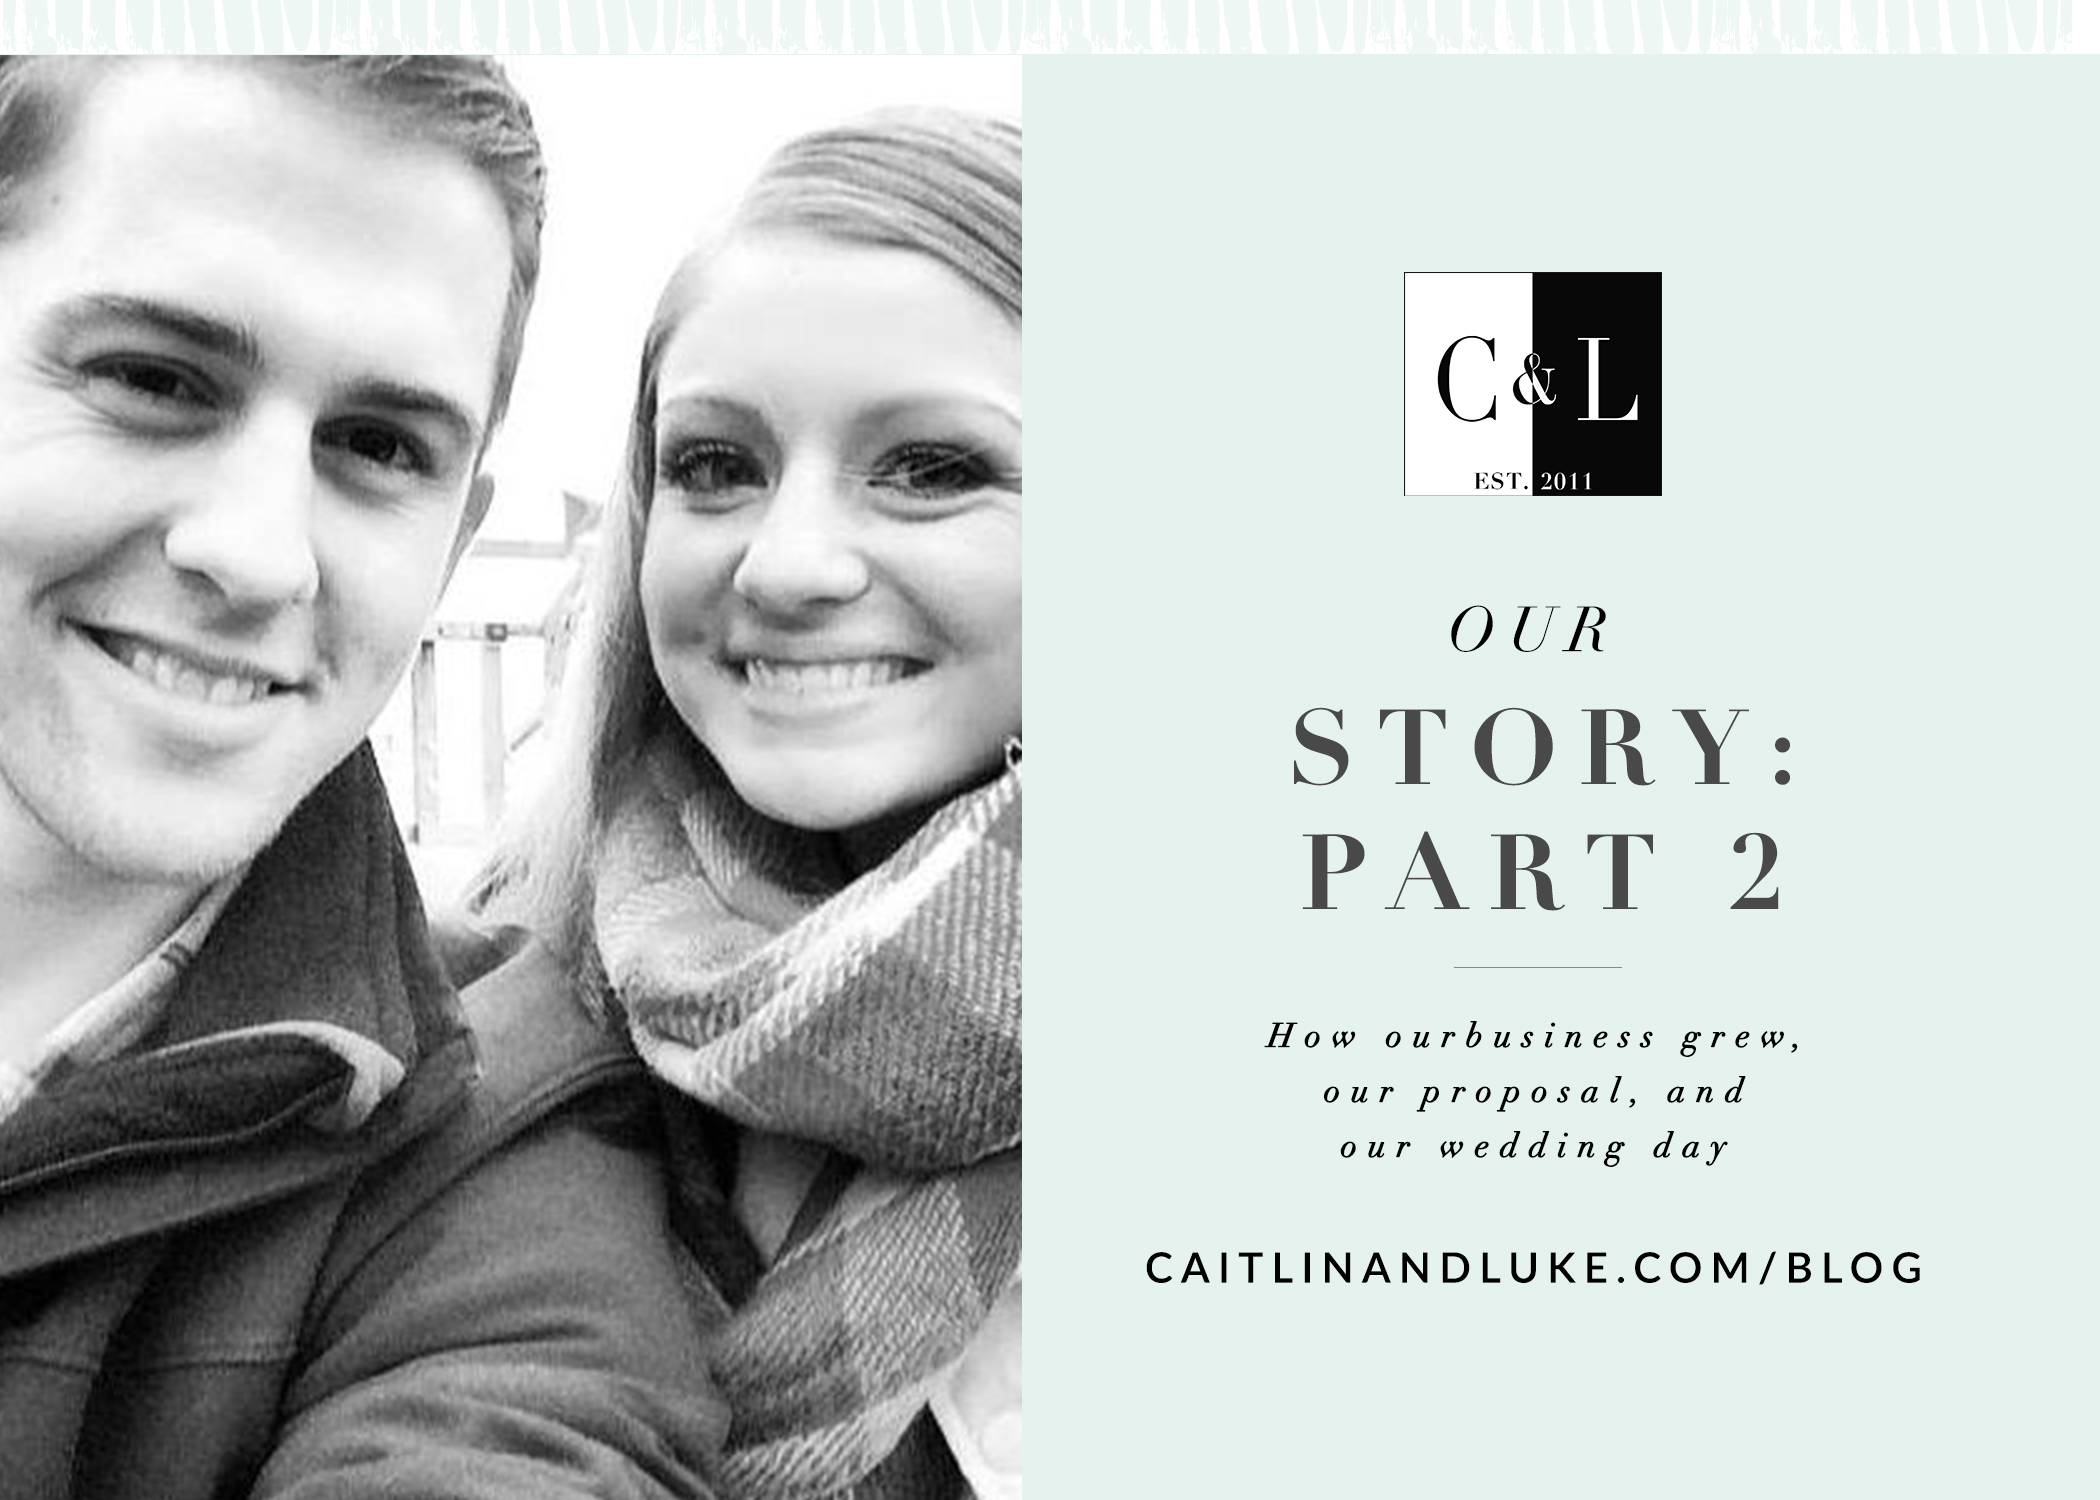 Our story part two